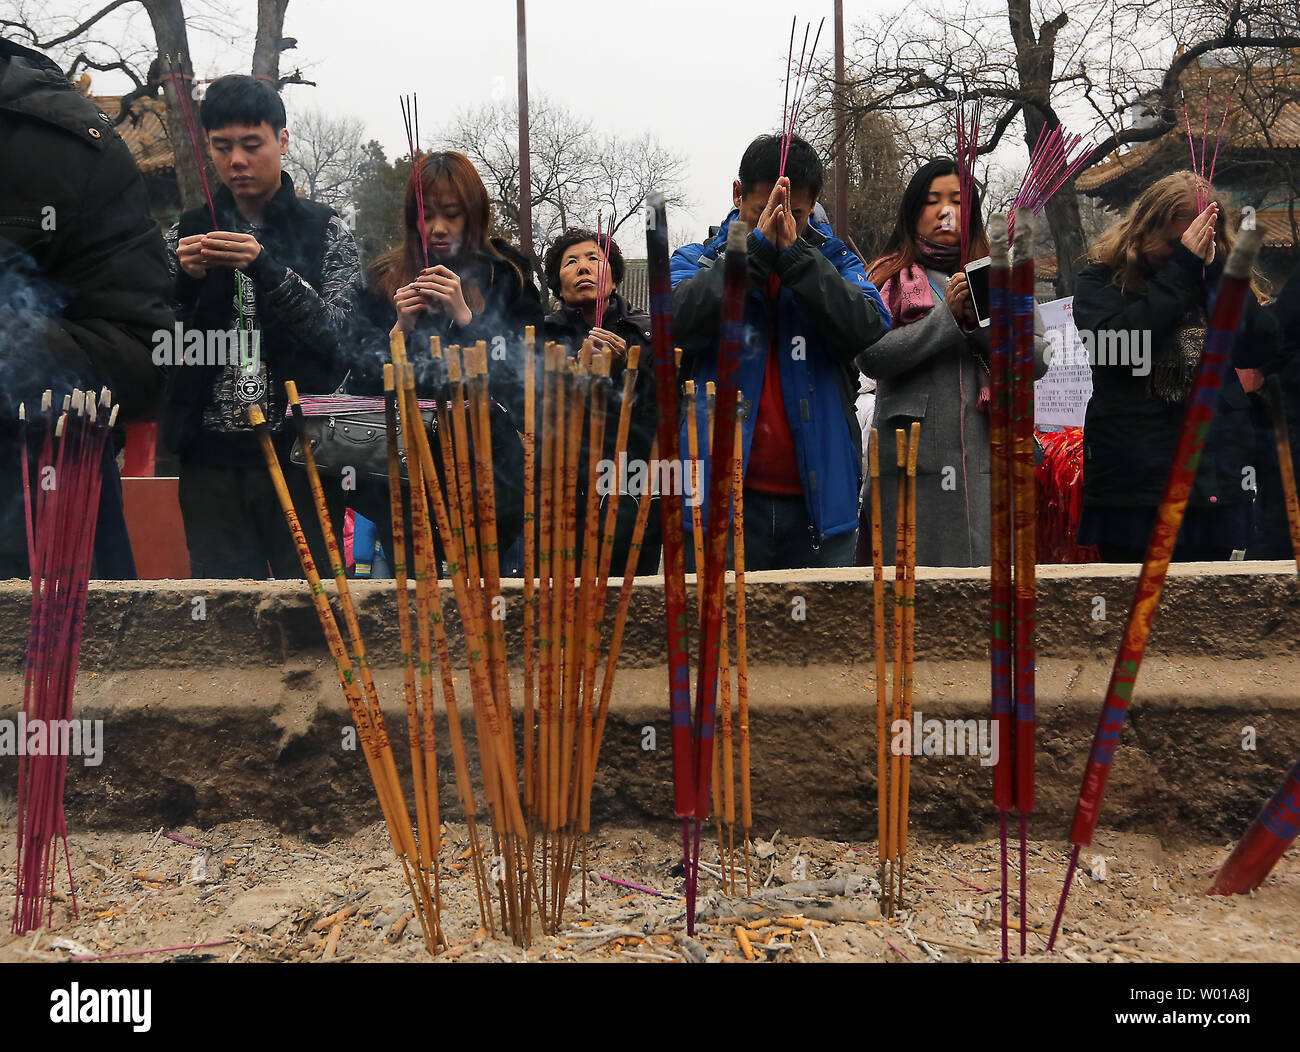 Chinese pray at a temple during the annual Spring Festival in Beijing on February 12, 2016.  This year's holiday was notably subdued, with vastly less fireworks and outdoor performances, due to China's economic slowdown and pollution concerns.    Photo by Stephen Shaver/UPI Stock Photo